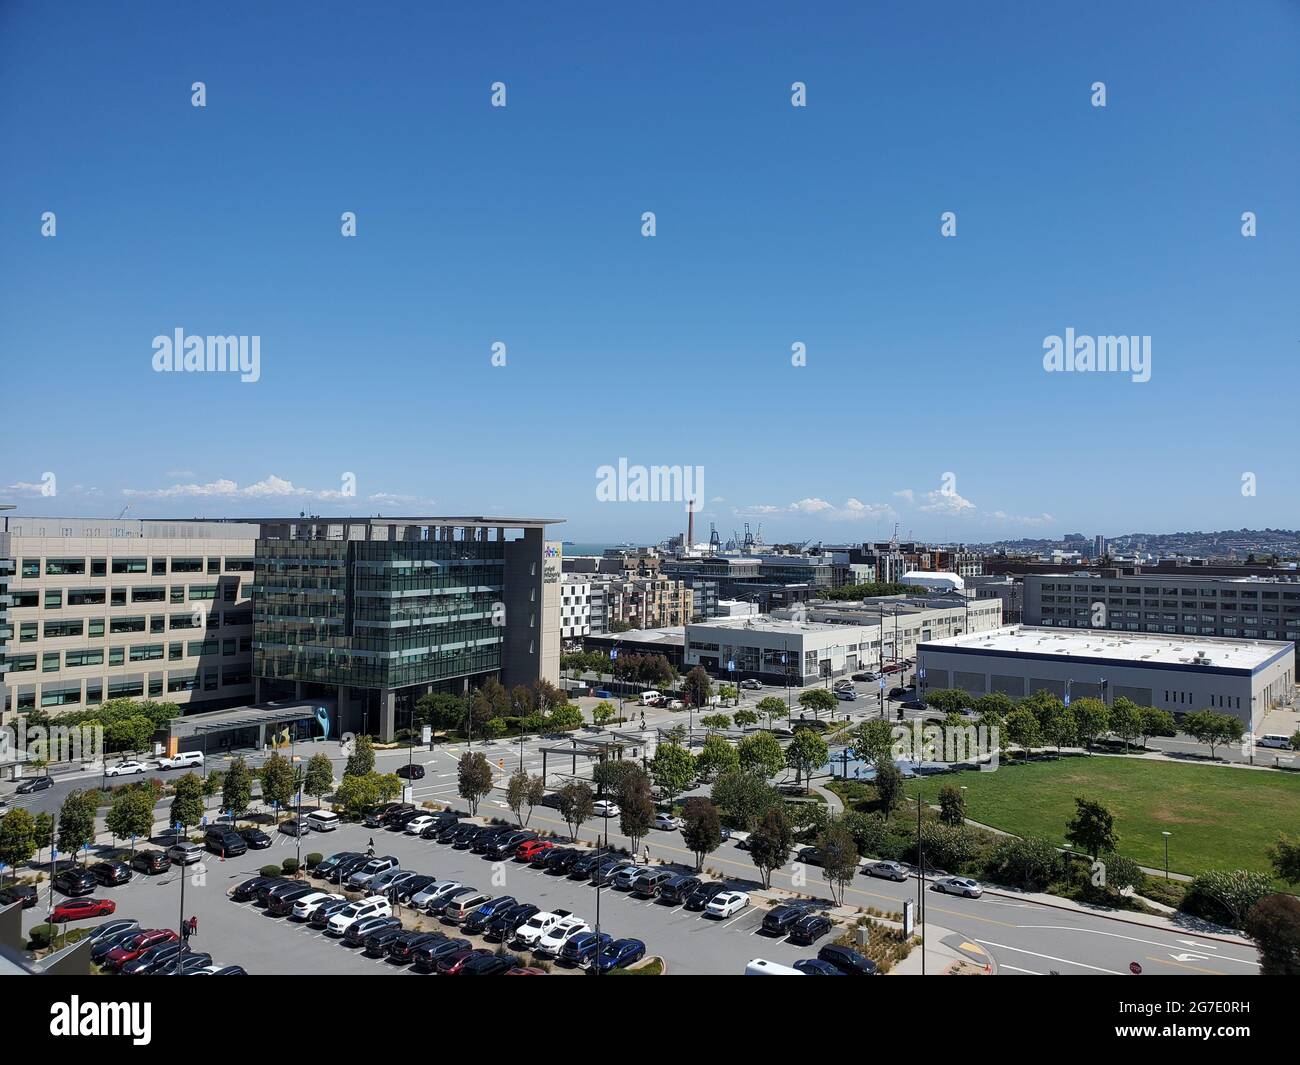 Aerial view of the Mission Bay neighborhood of San Francisco, California looking towards the Dogpatch and Potrero Hill neighborhood, May 21, 2021. () Stock Photo